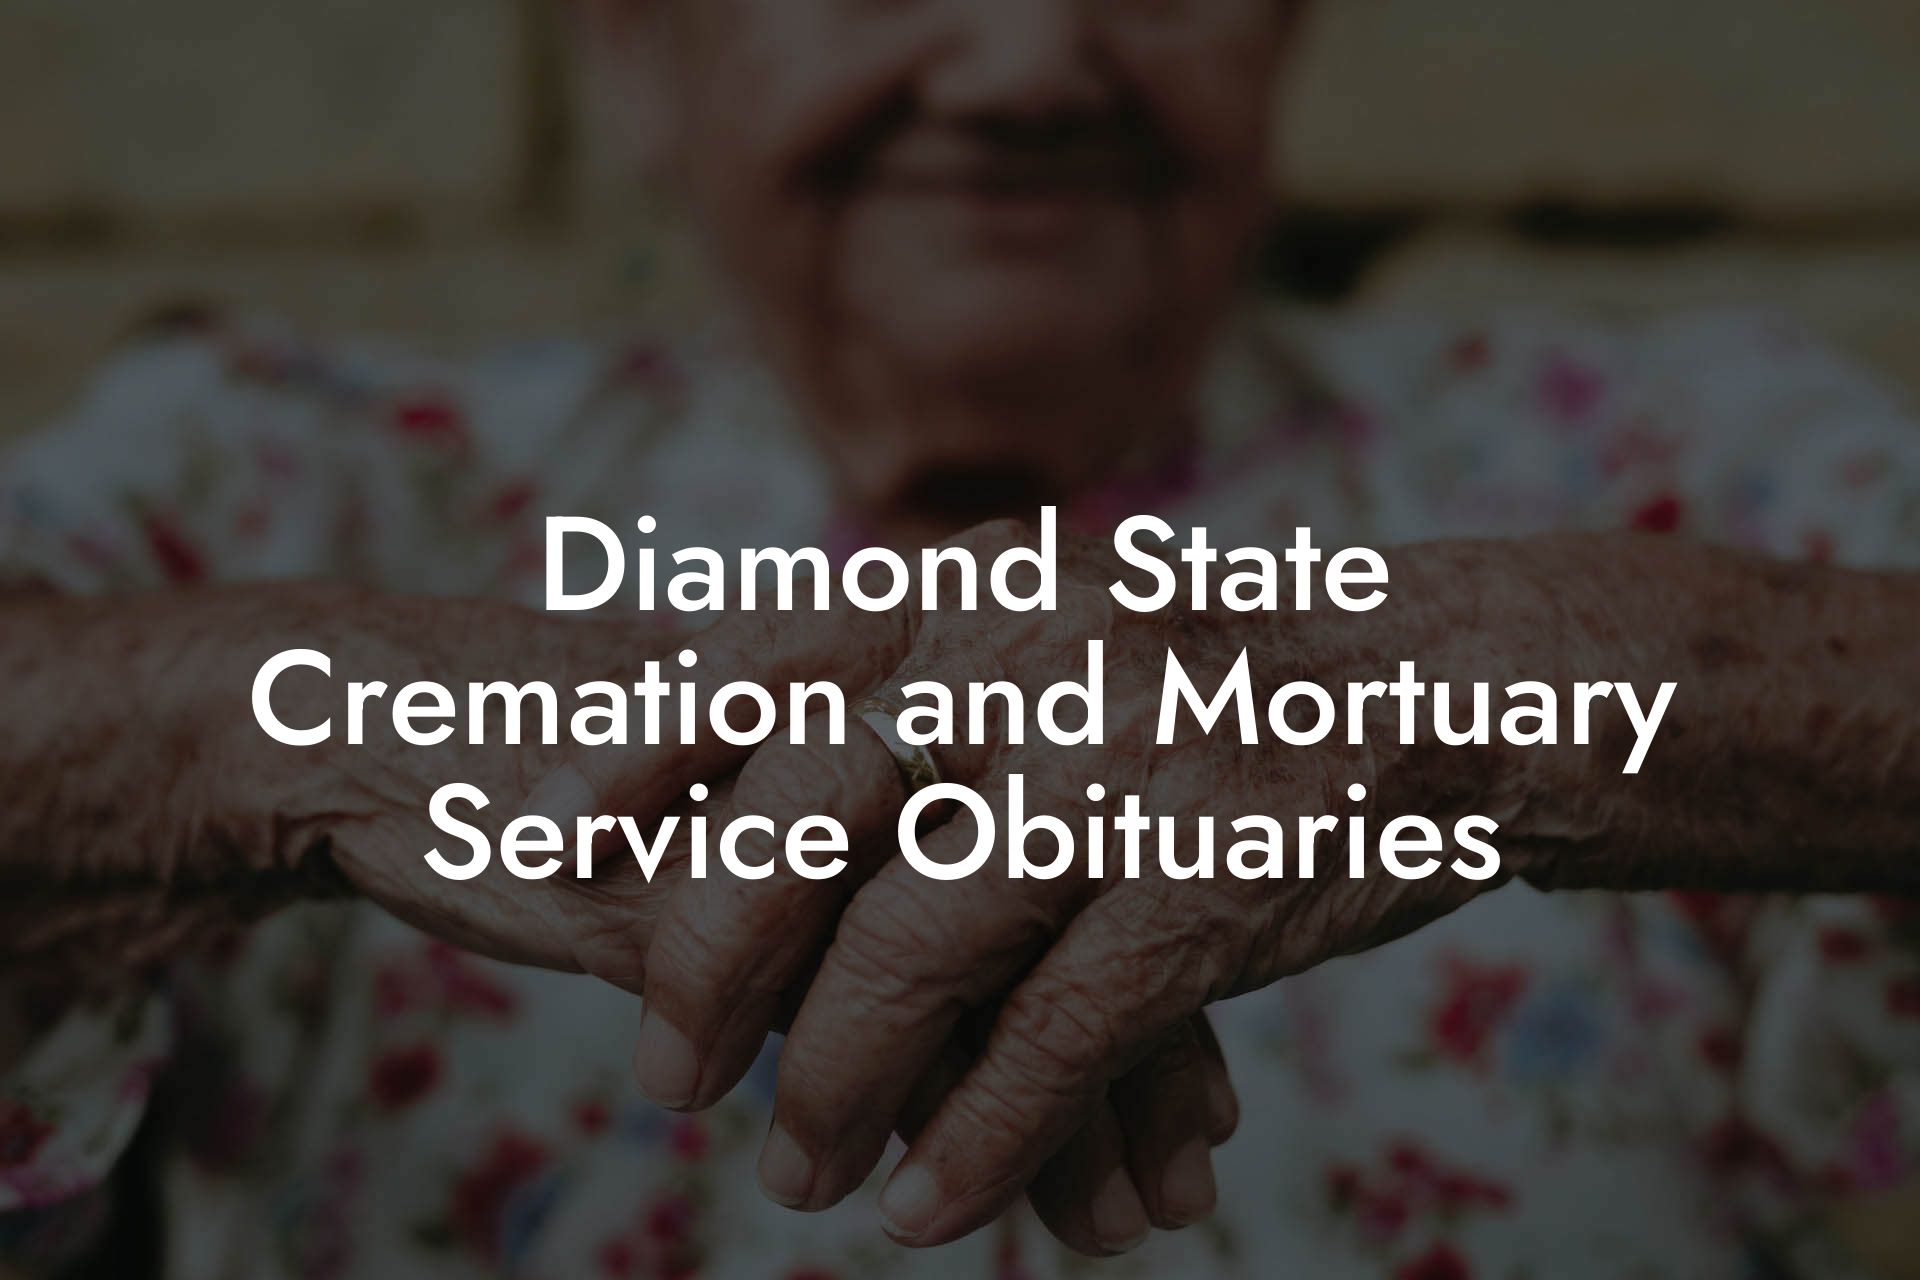 Diamond State Cremation and Mortuary Service Obituaries